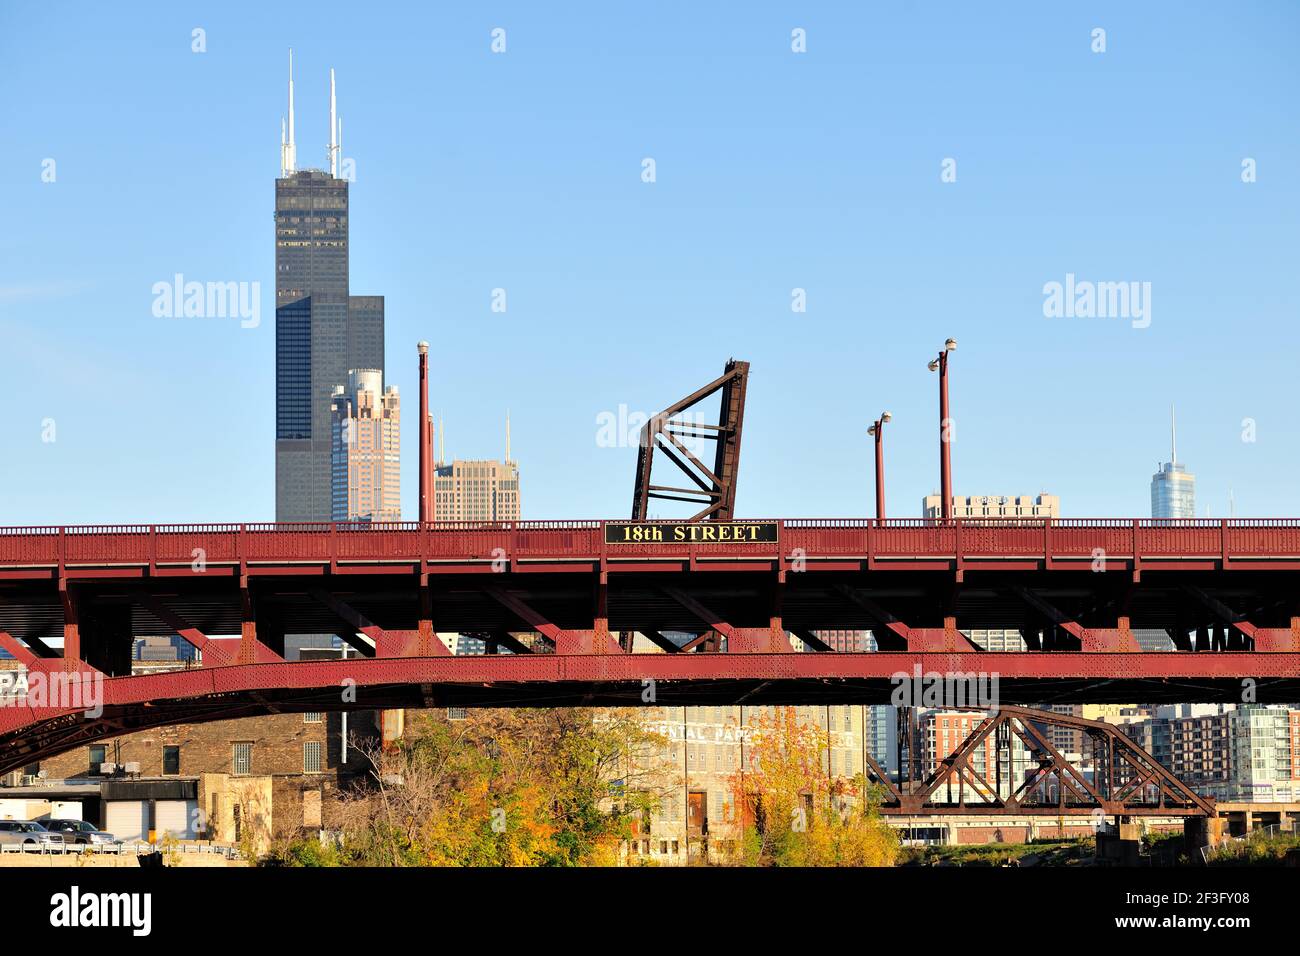 Chicago, Illinois, USA. A portion of the downtown Chicago skyline visible beyond the the 18th Street Bridge. Stock Photo